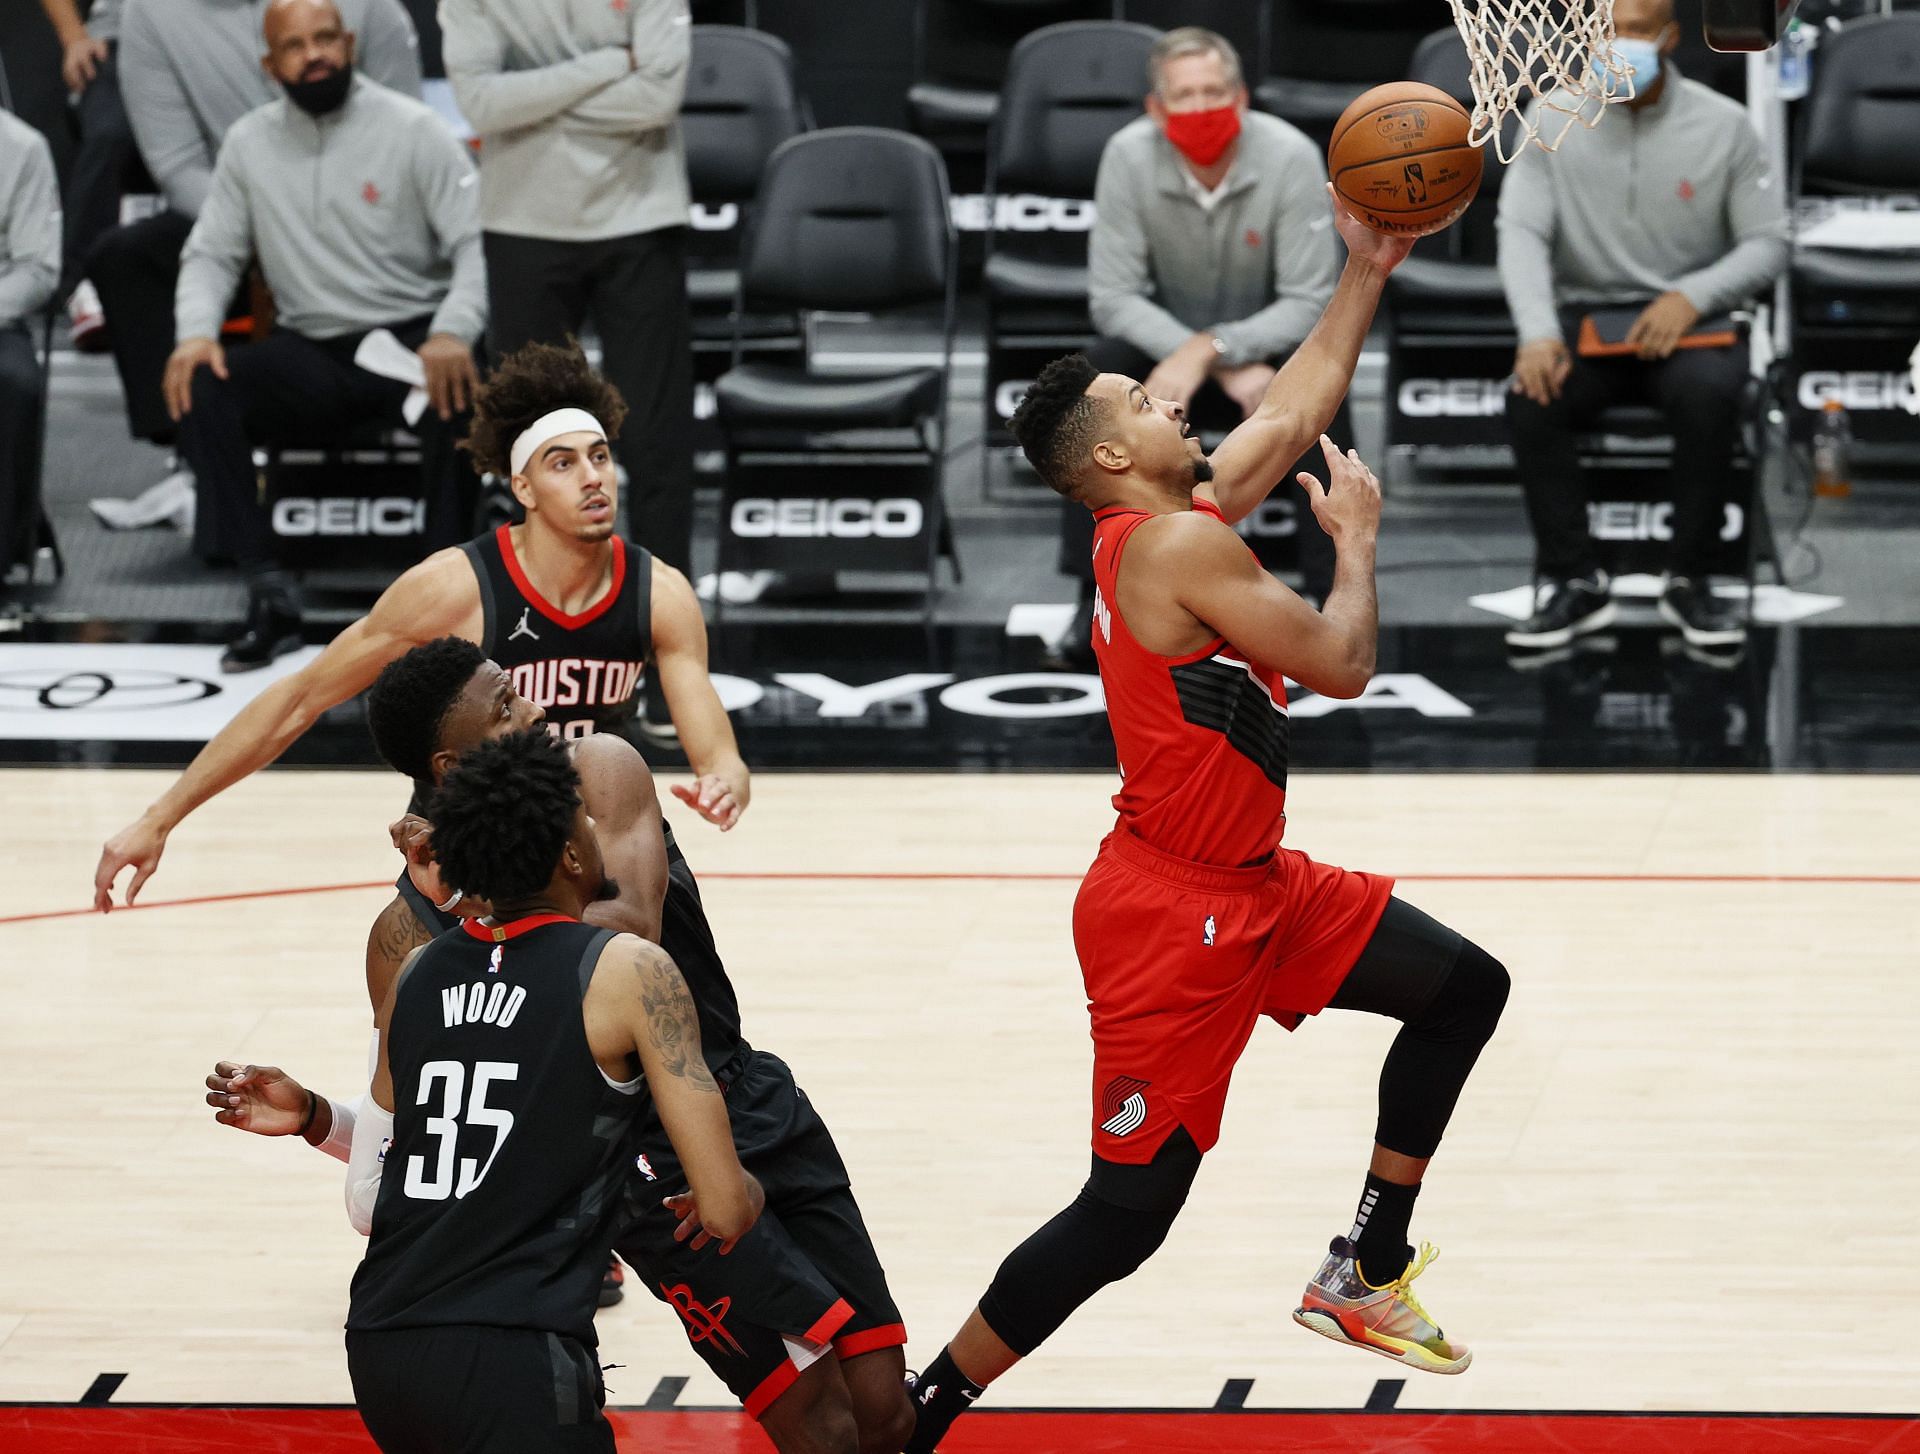 A snap from a game between the Houston Rockets and the Portland Trail Blazers.